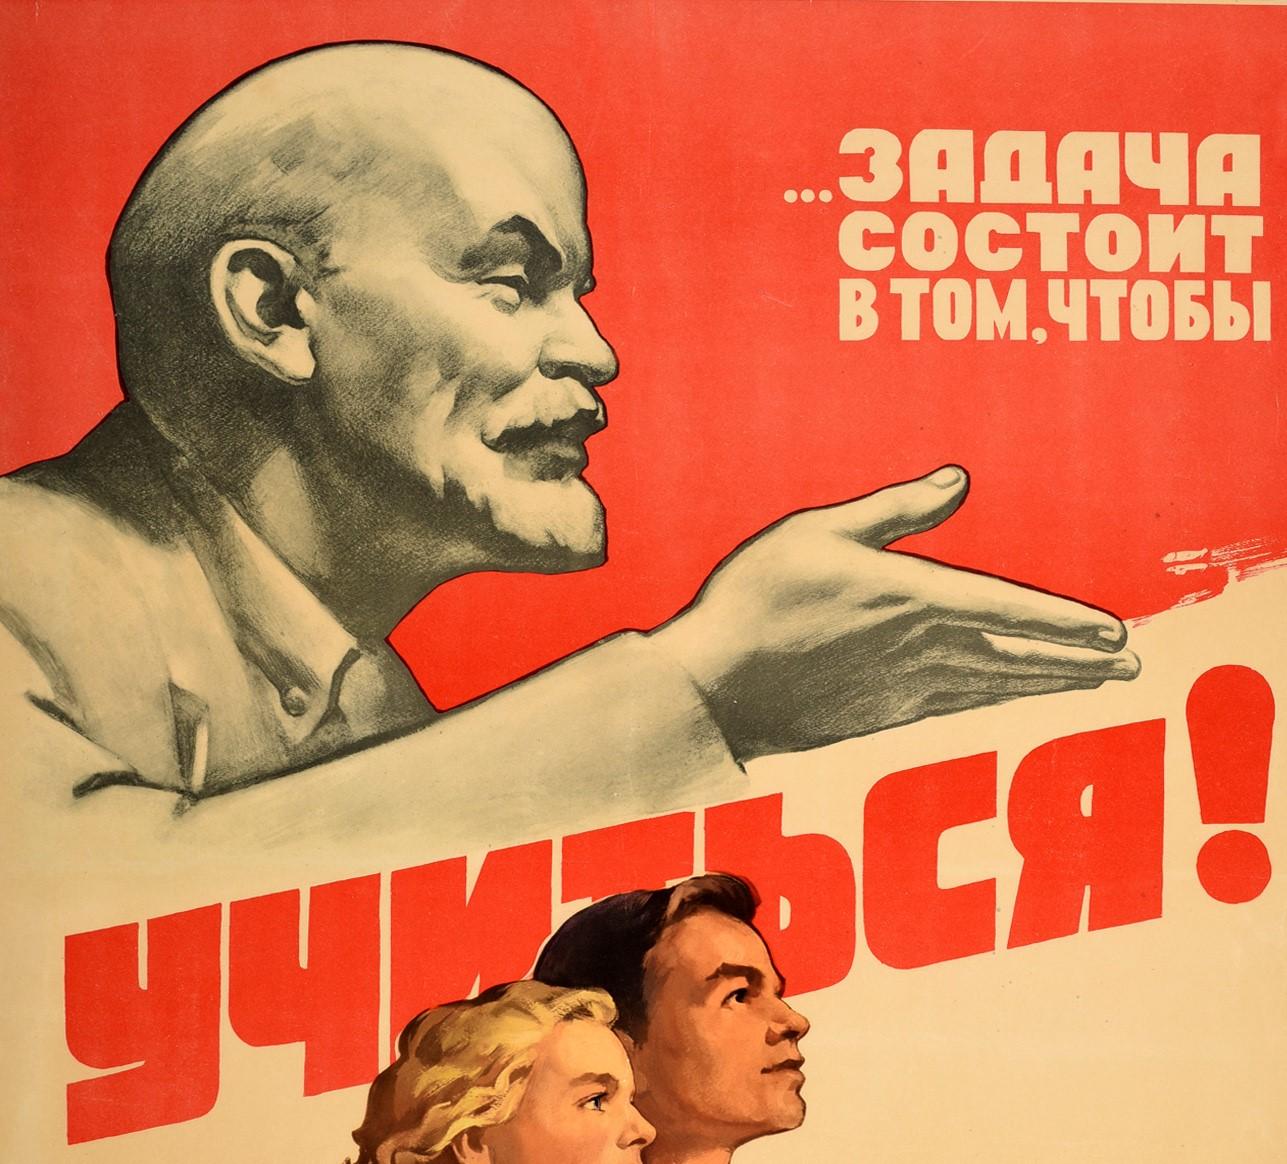 Original vintage Soviet propaganda poster - The Task is to Study! - featuring a bold image of Lenin against a red background above two students looking ahead, a young man and lady striding forward with purpose, holding a book and scroll of paper in